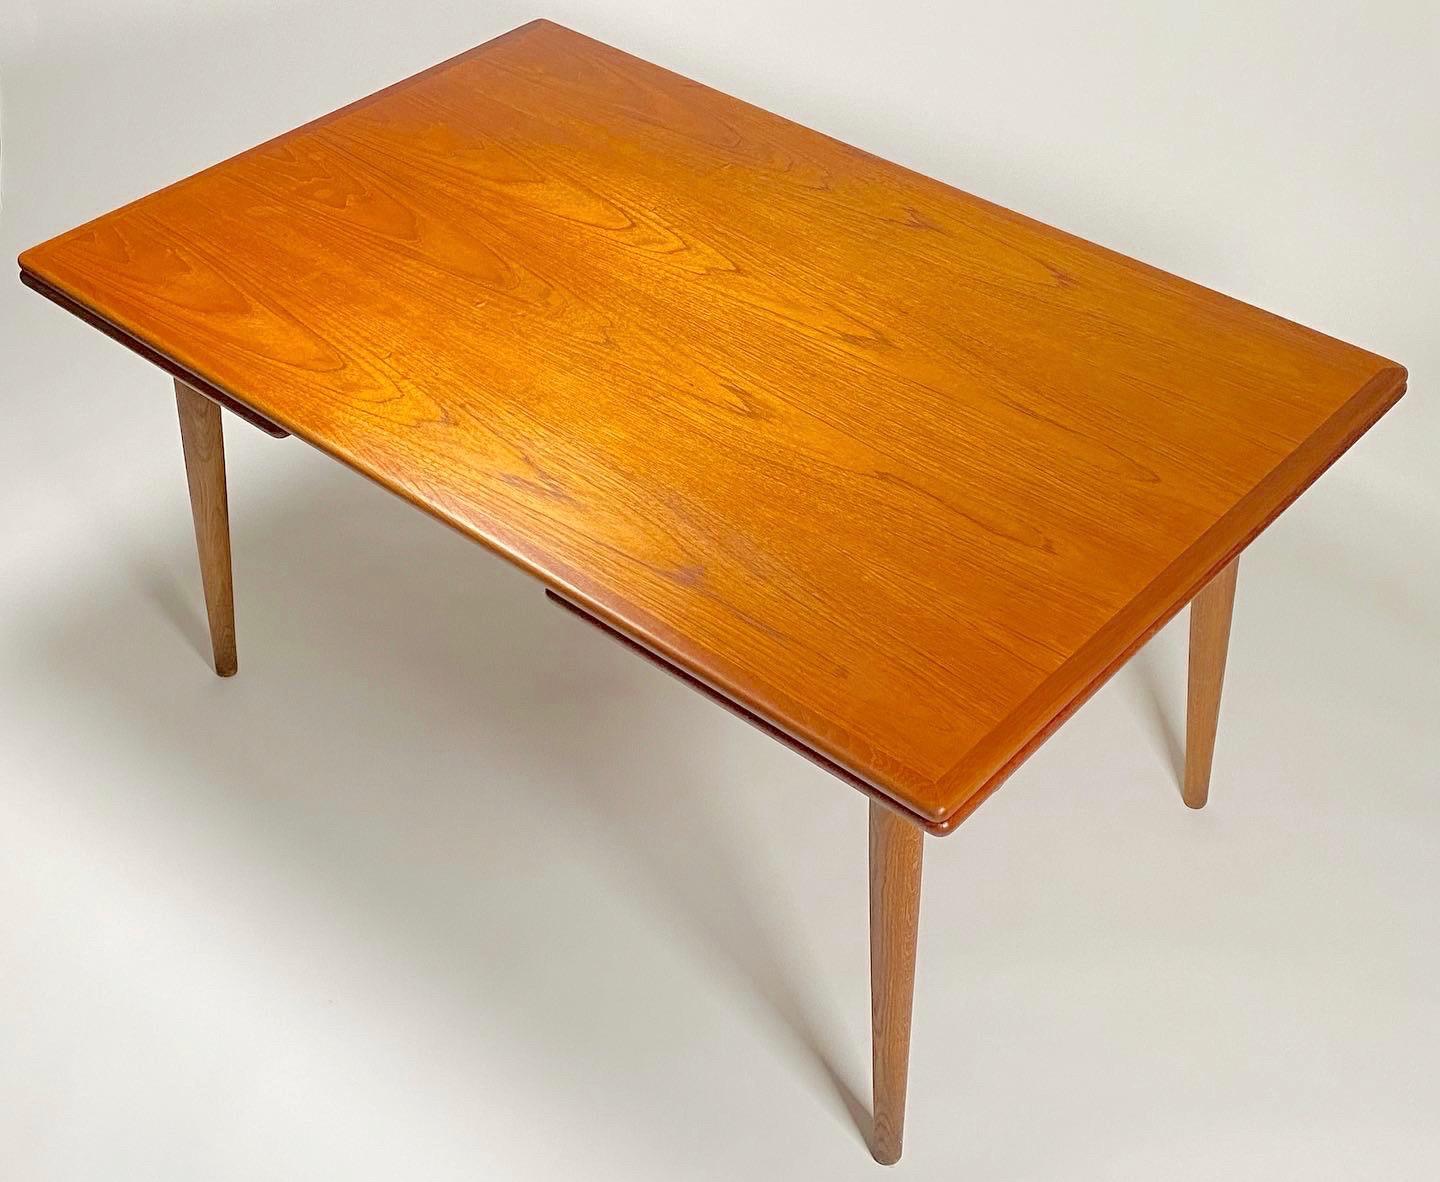 Model AT 312 teak and oak dining table by Danish architect Hans Wegner (1914-2007) for Andreas Tuck early 1950s. The table has an exceptional book matched old growth teak top with two leaves that expand the table to a total of 94.5